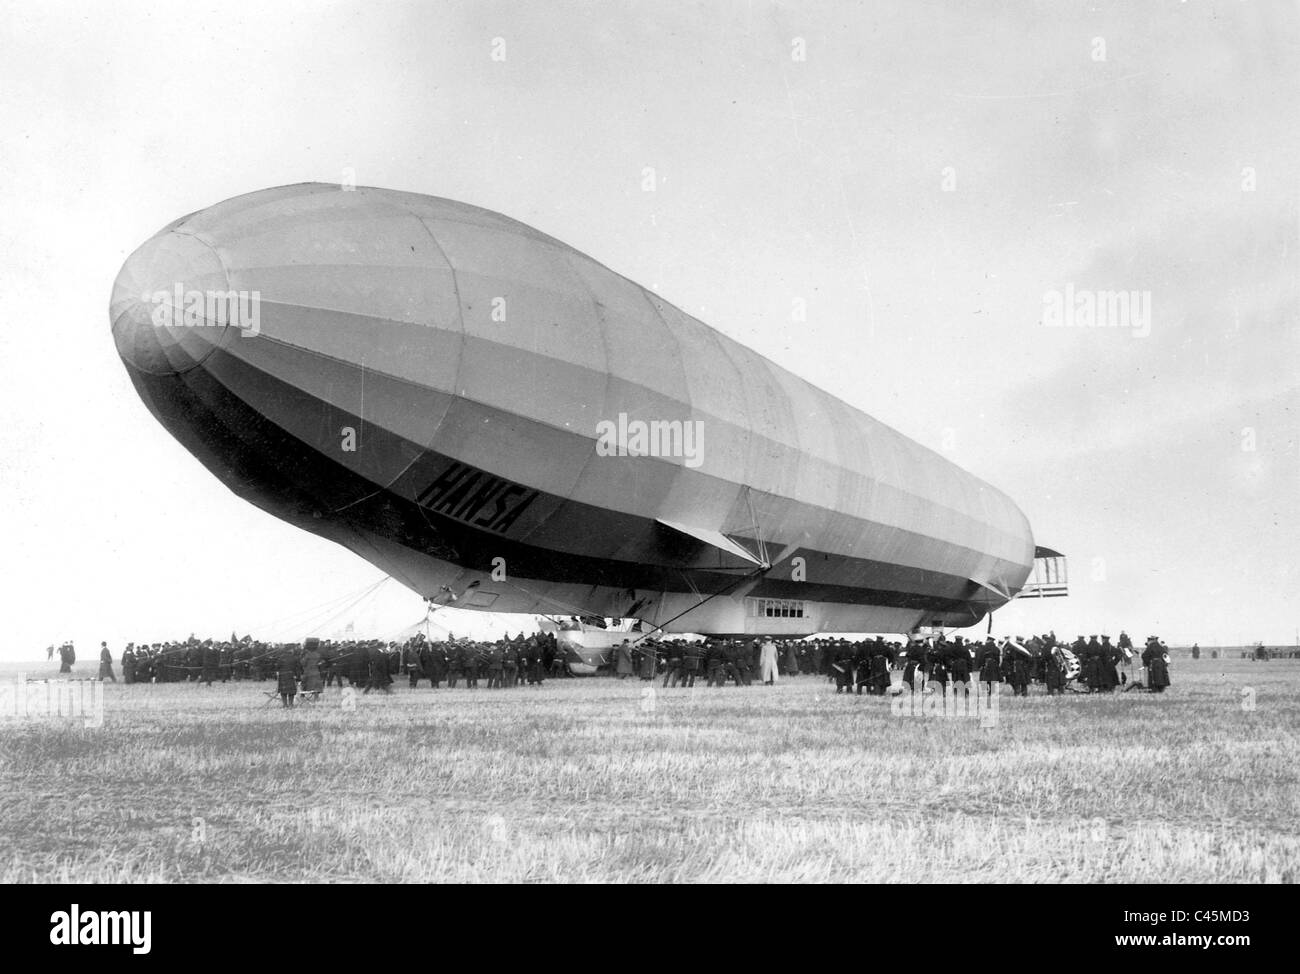 The Zeppelin airship 'Hansa' (LC 13) after landing, 1912 Stock Photo